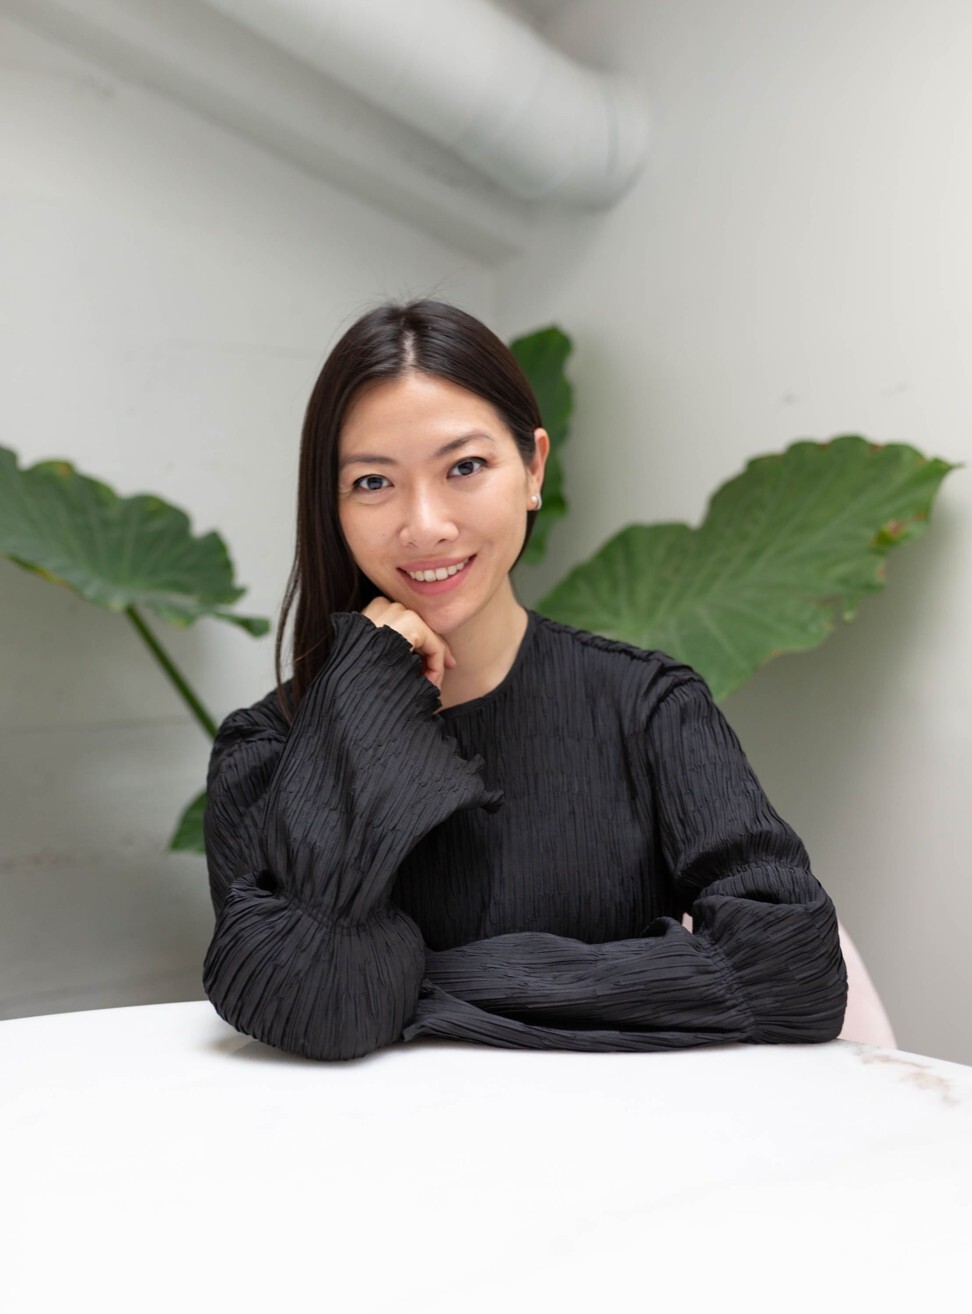 Priscilla Tsai left her financial career in 2015 to launch Cocokind.